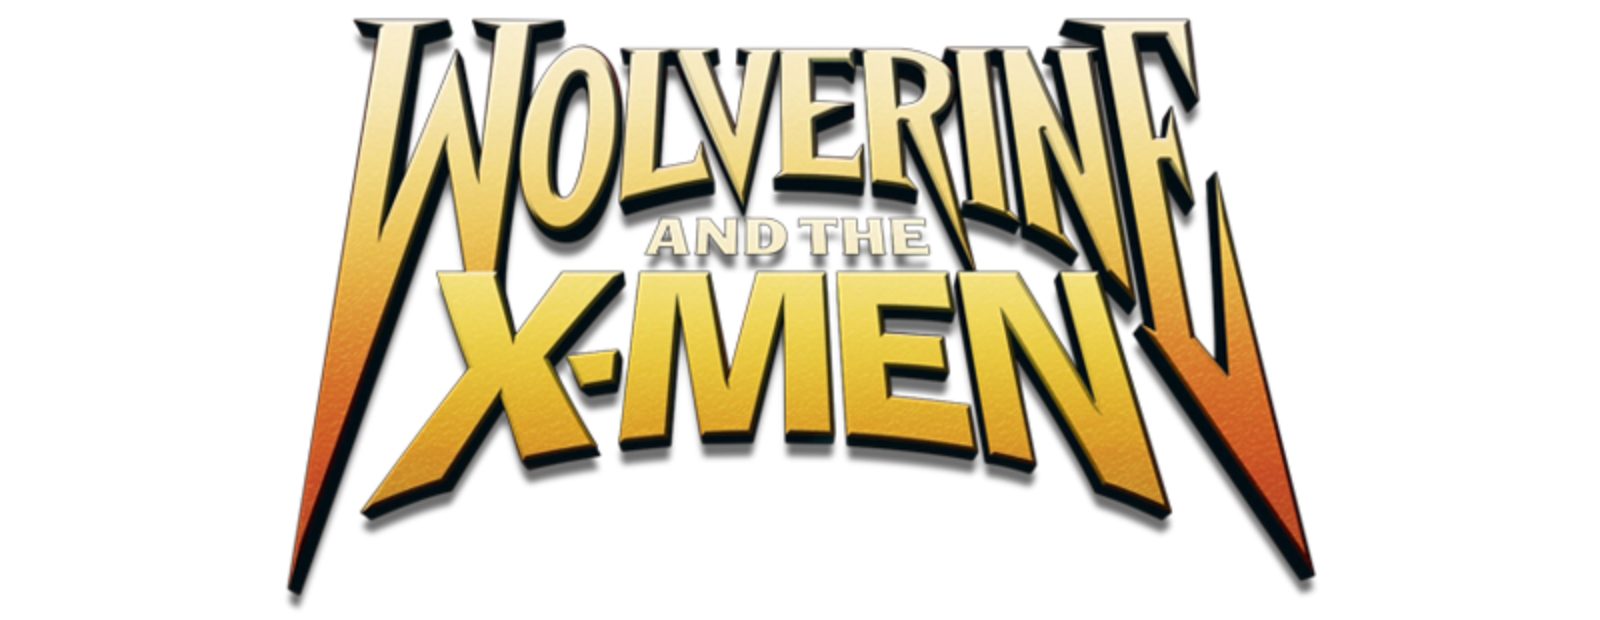 Wolverine and the X-Men (3 DVDs Box Set)